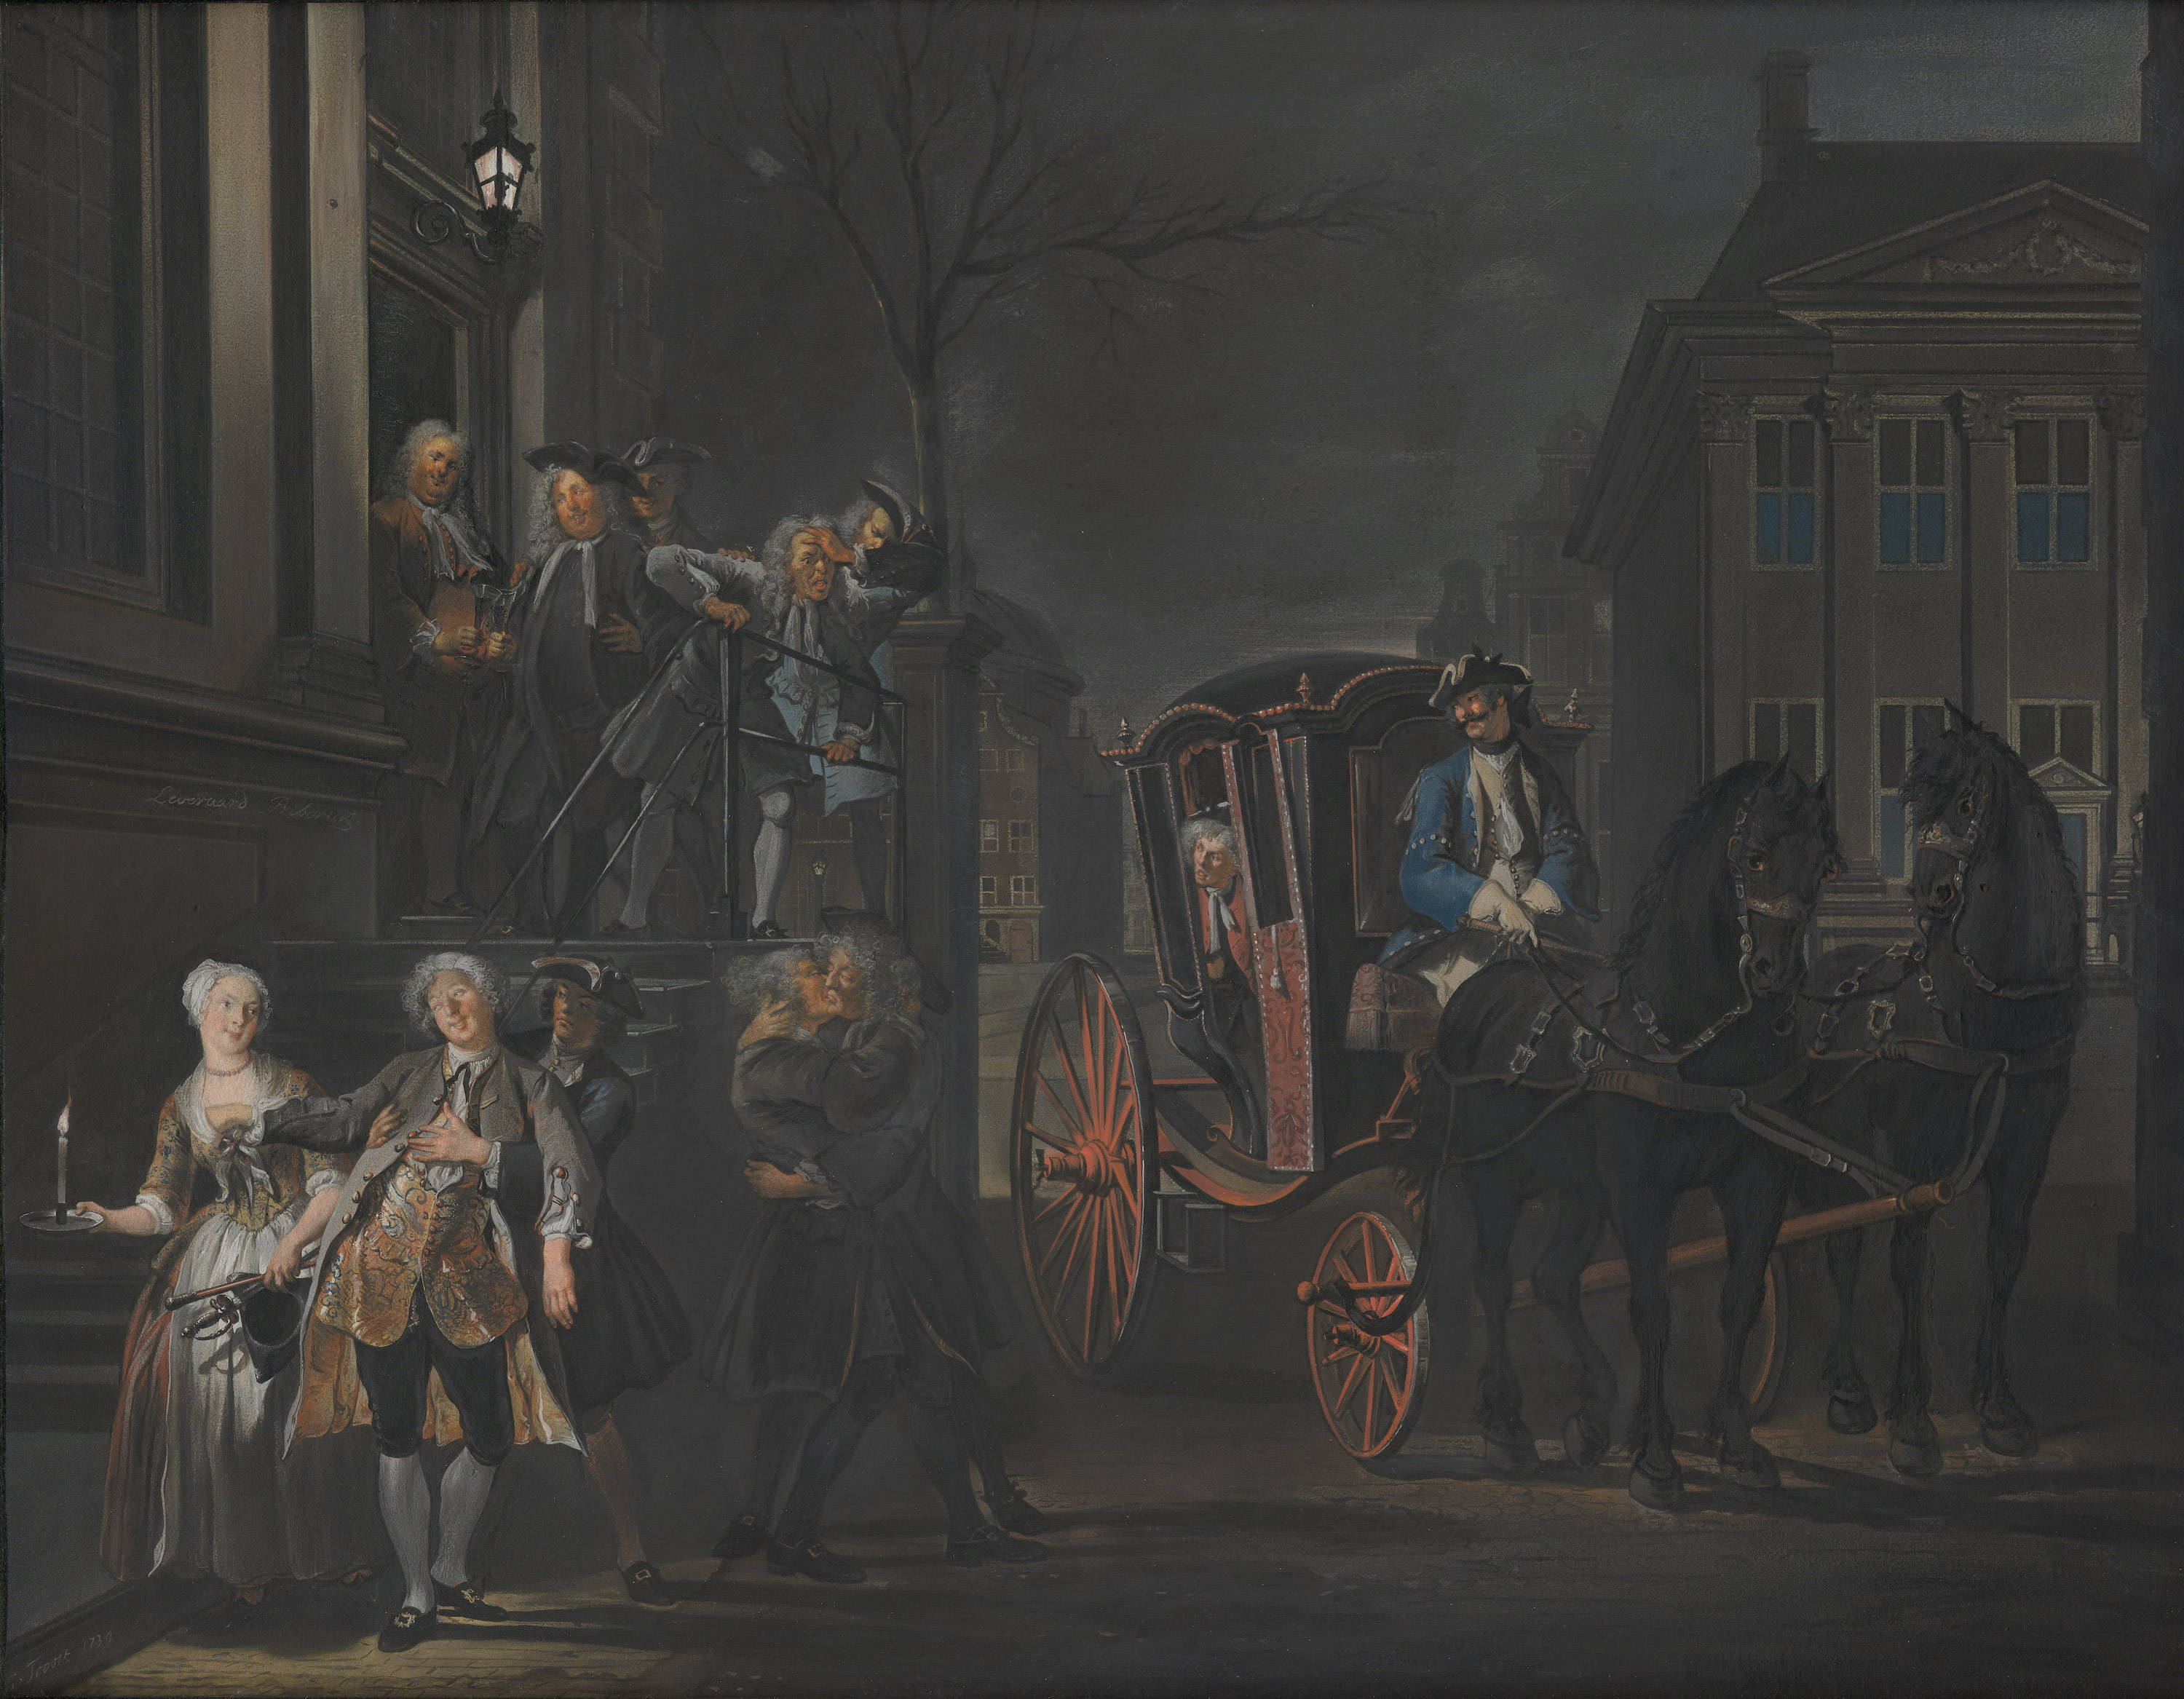 Those Who Could, Walked; Those Who Could Not, Fell by Cornelis Troost - 1739 - 57.7 x 74 cm Mauritshuis, The Hague